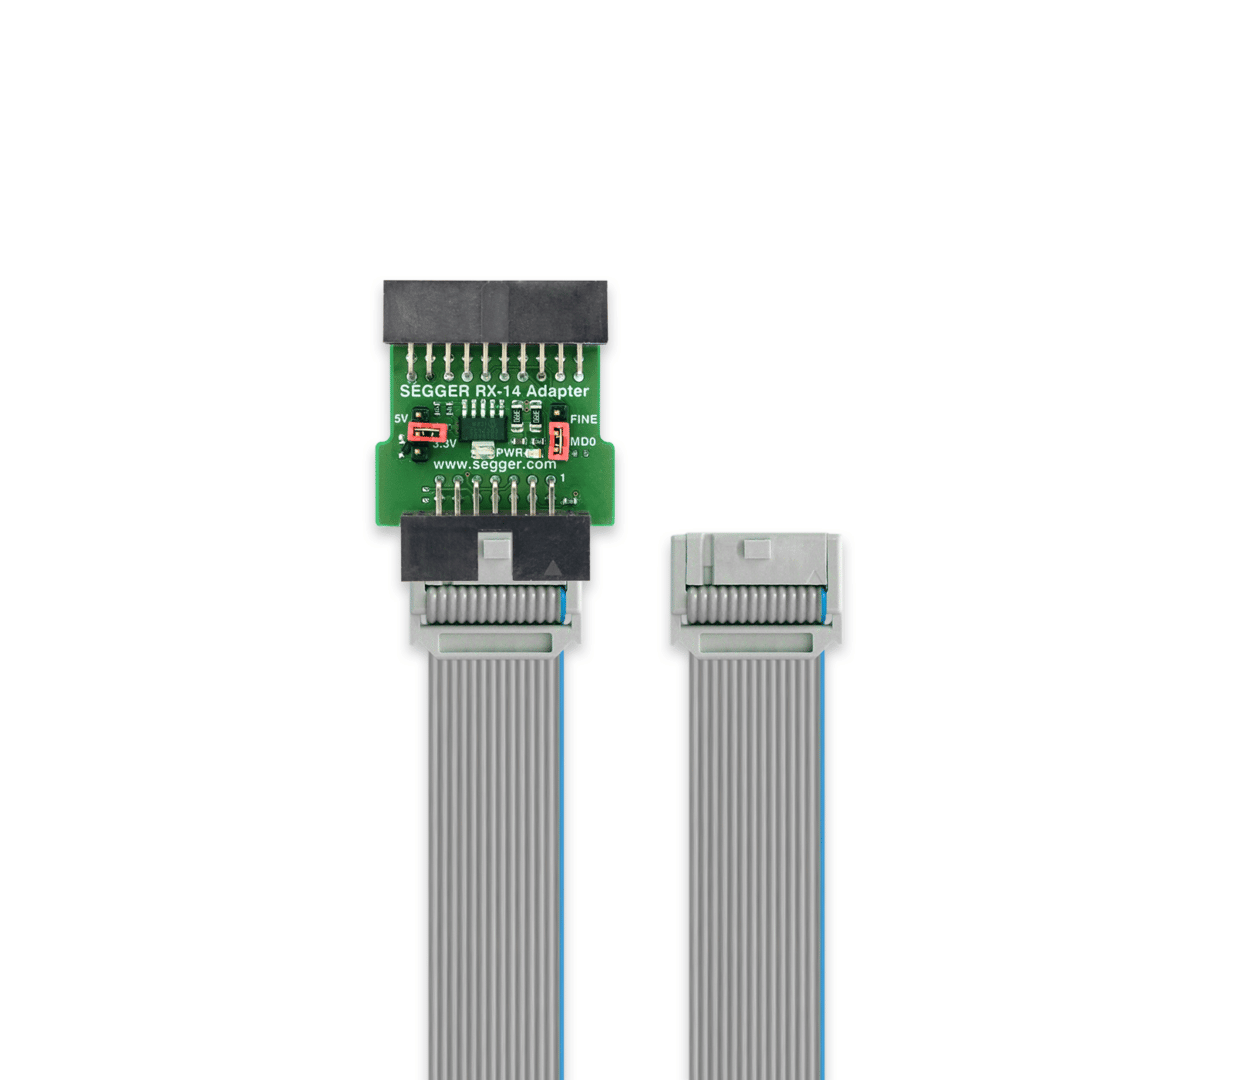 J-Link RX14 Adapter